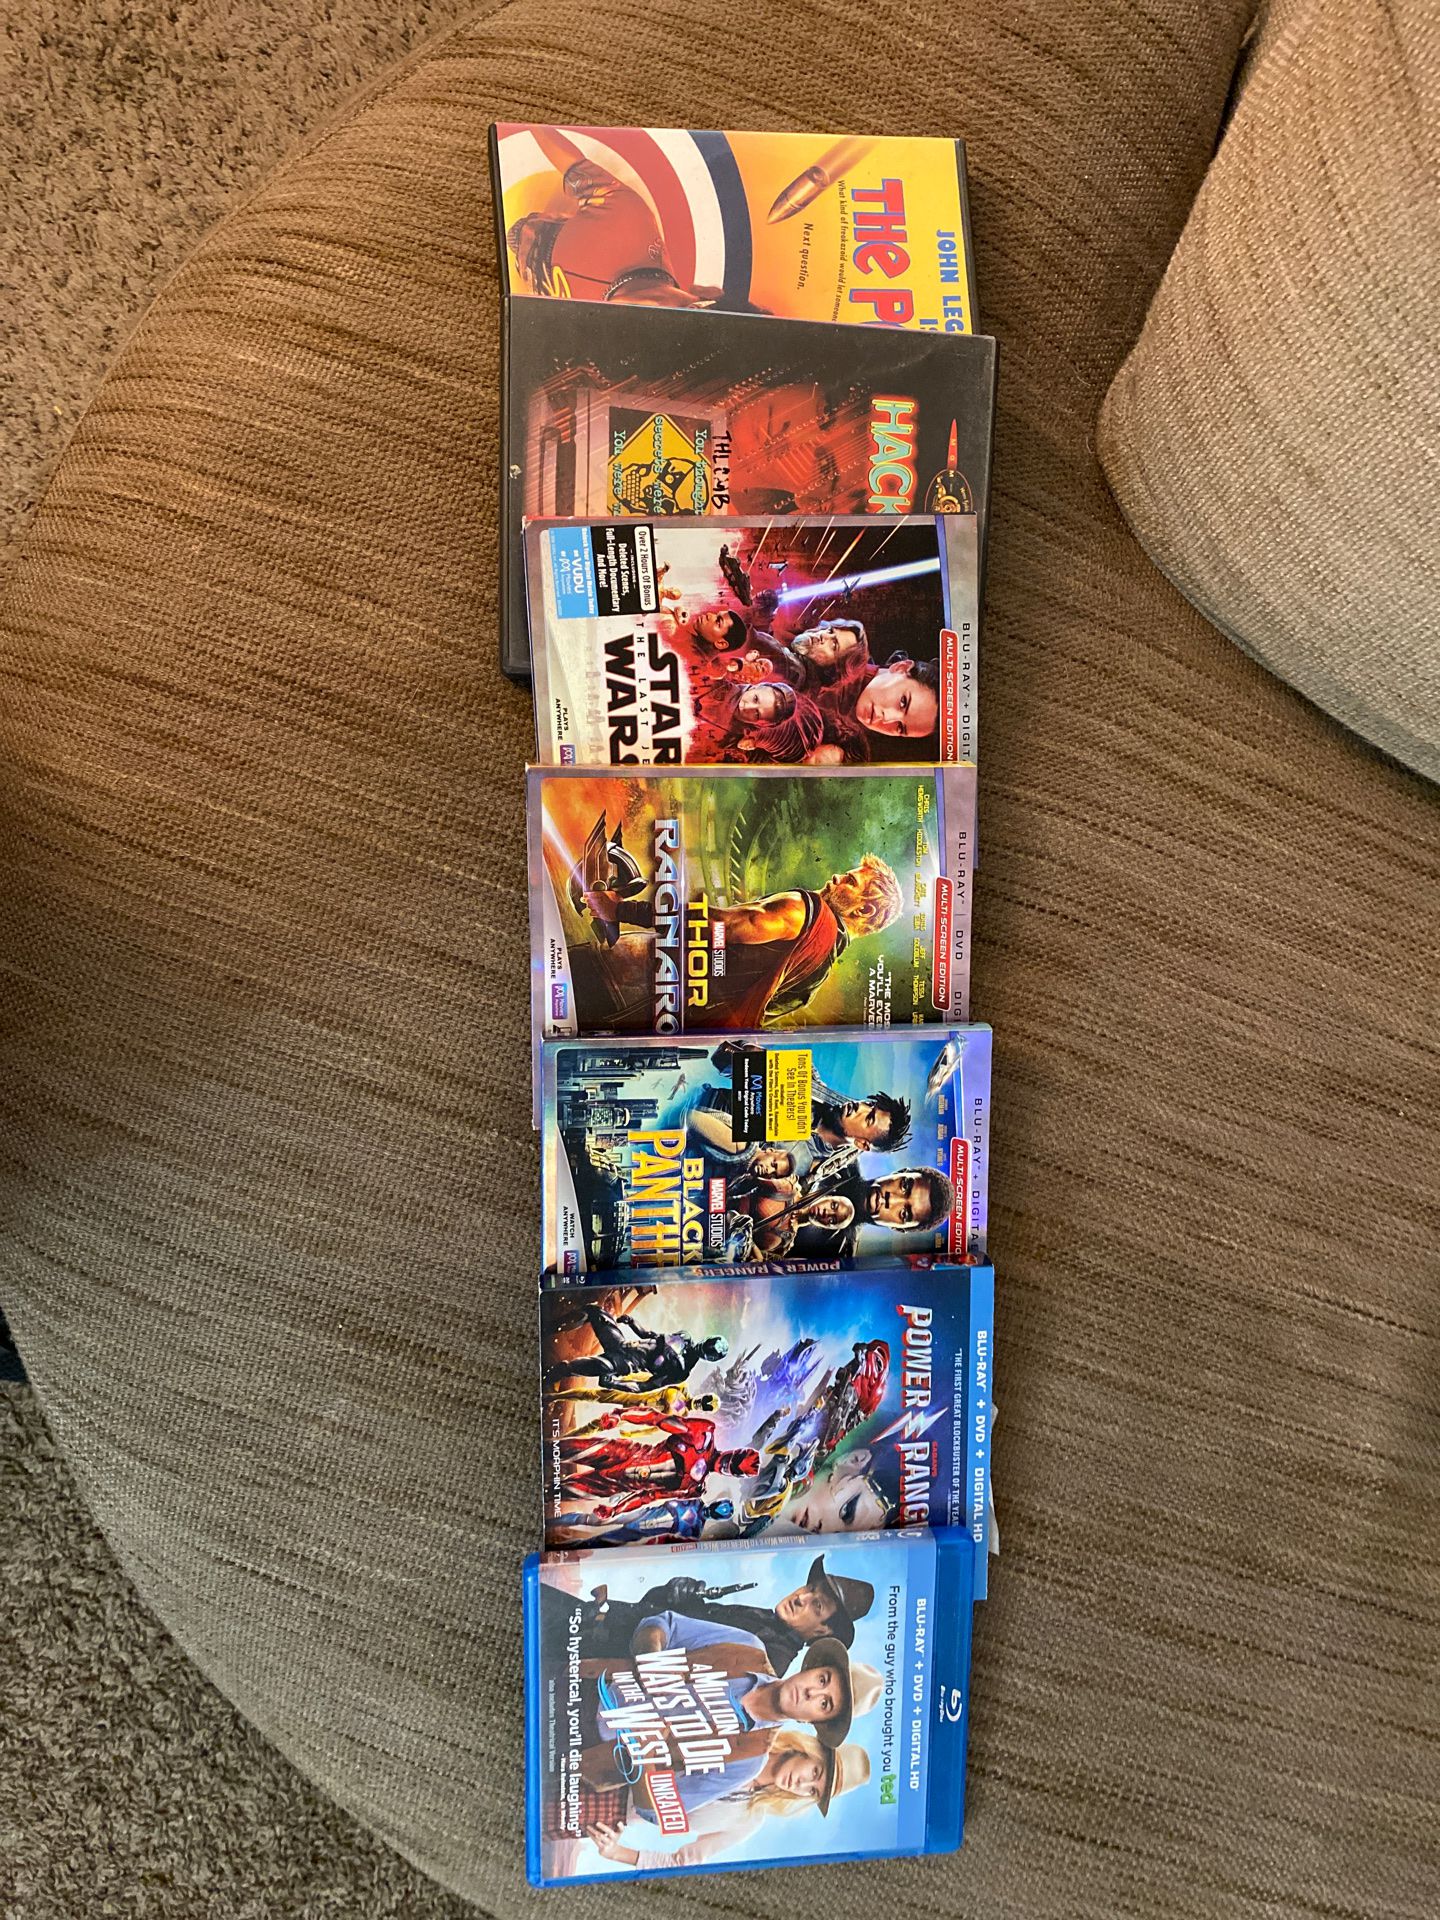 Blu-rays for sale